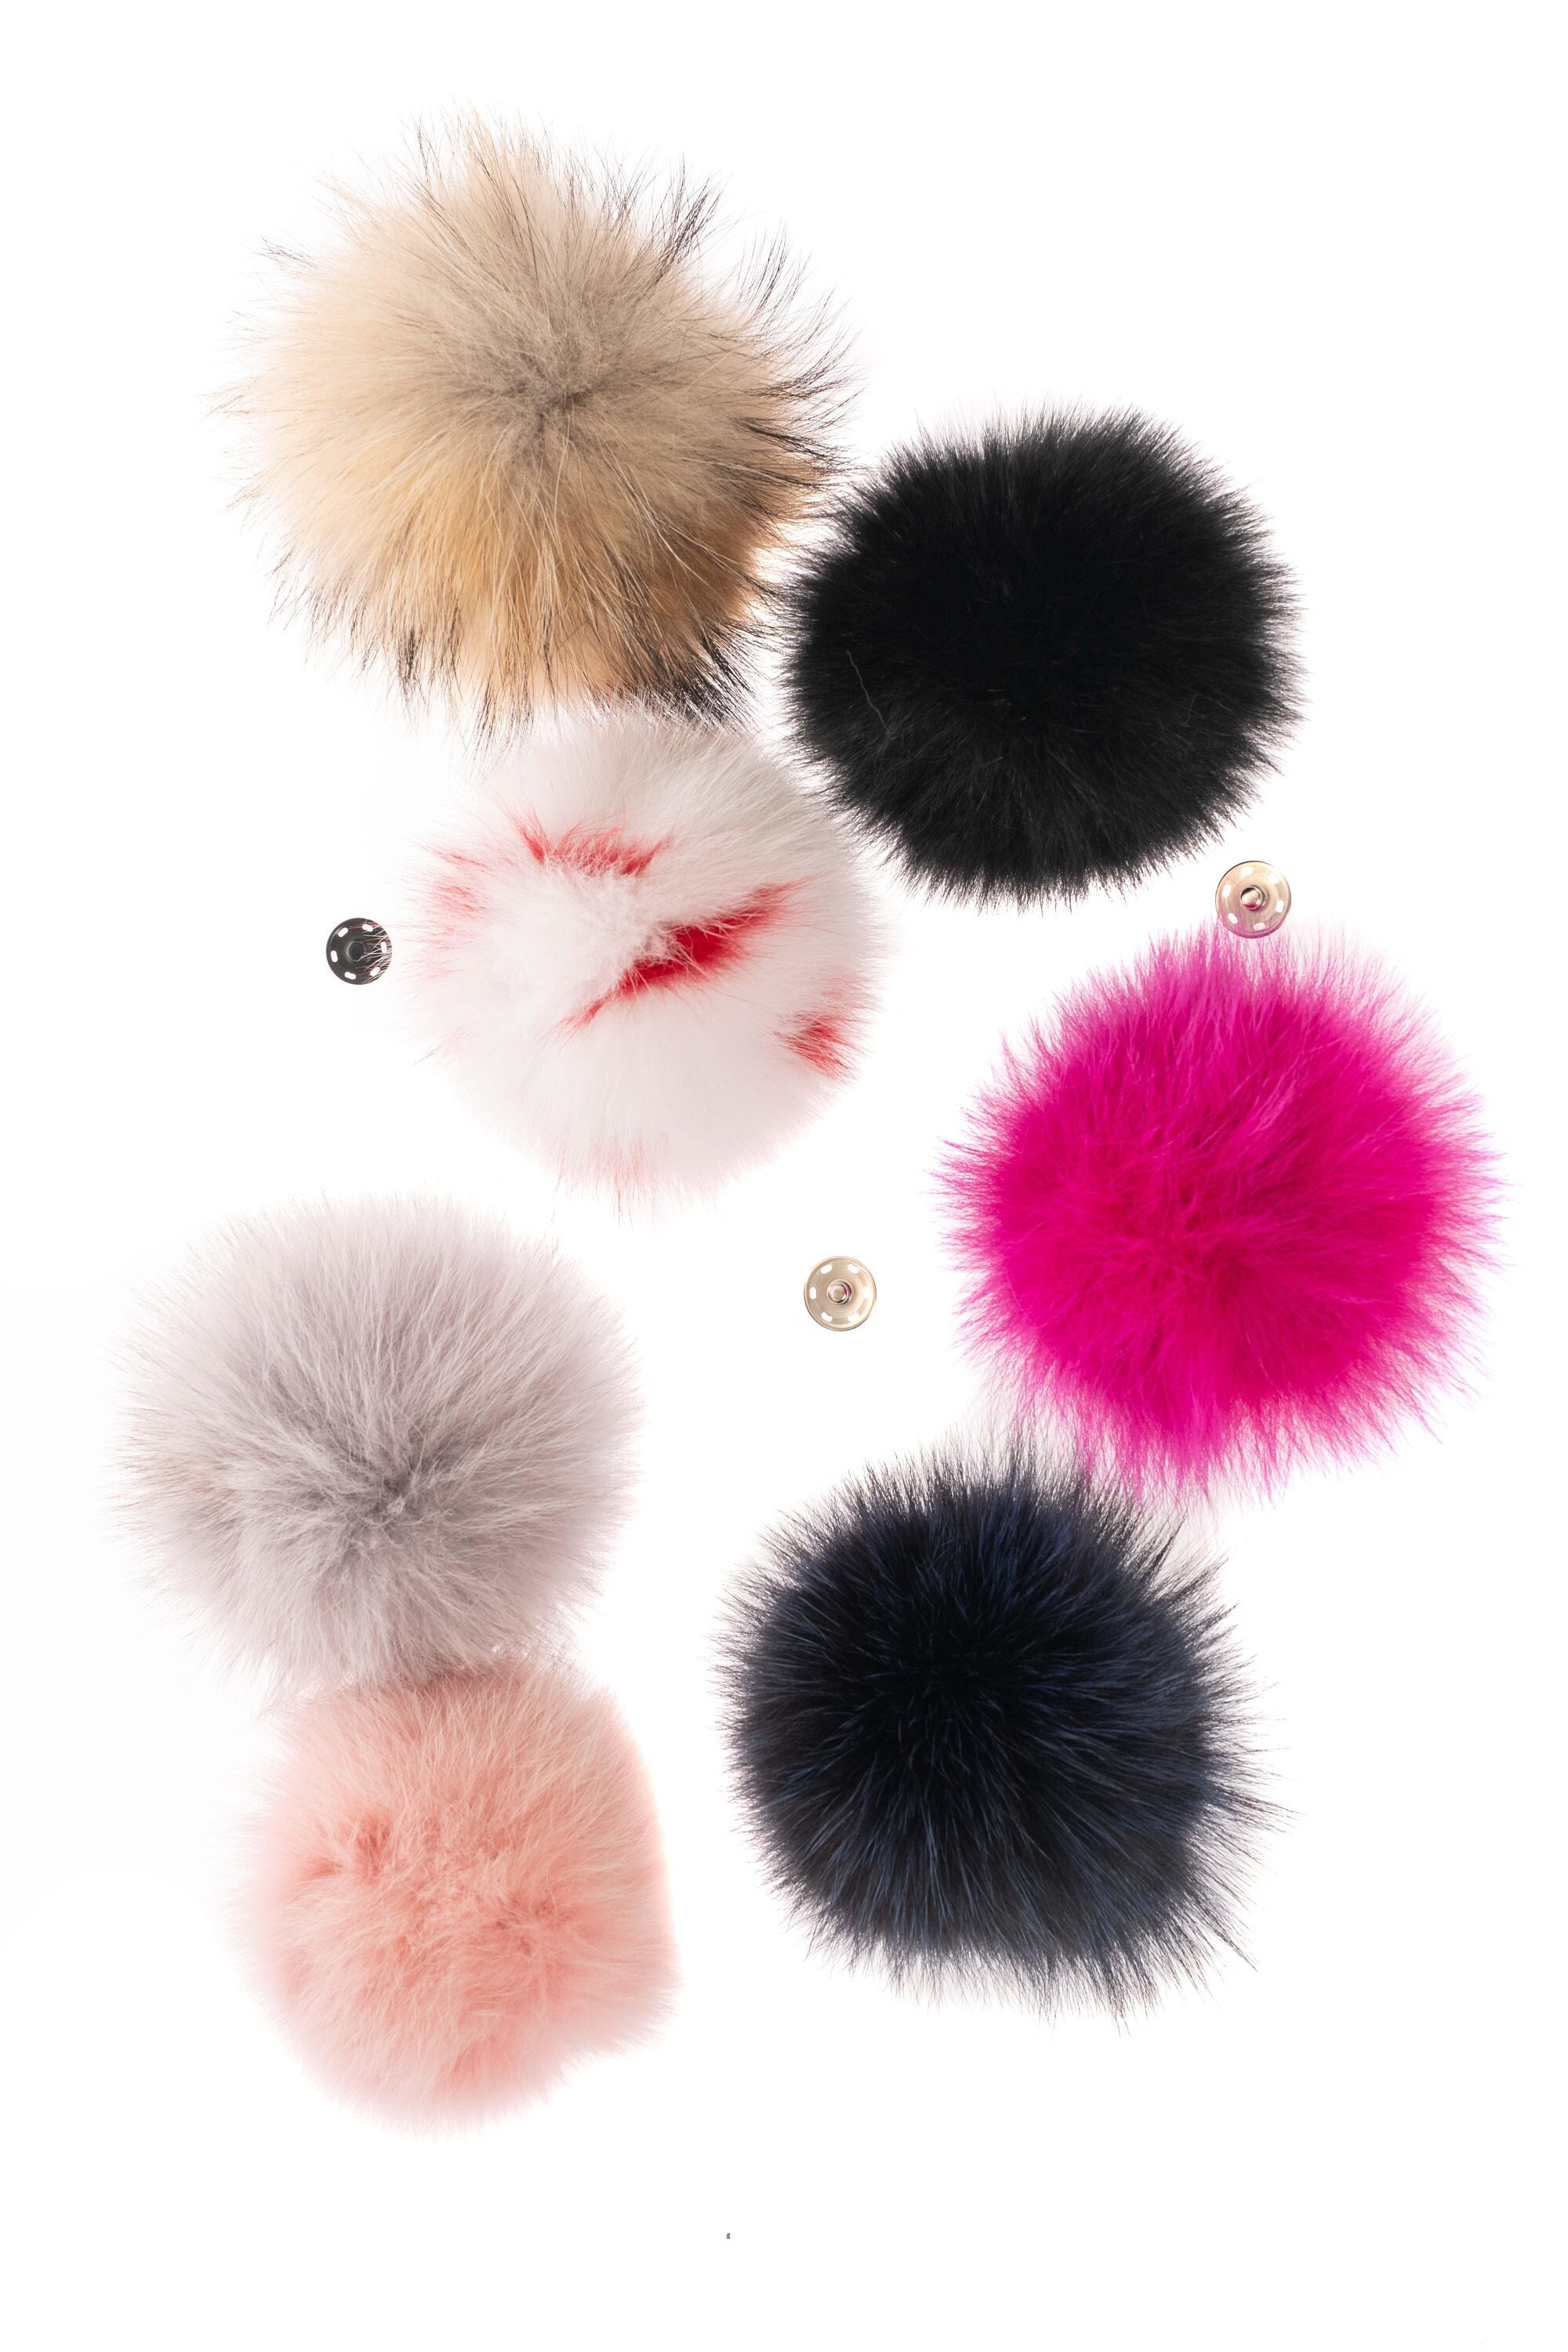 Pom-pom Buttons for Use With Faux Fur and Yarn Pom Poms That